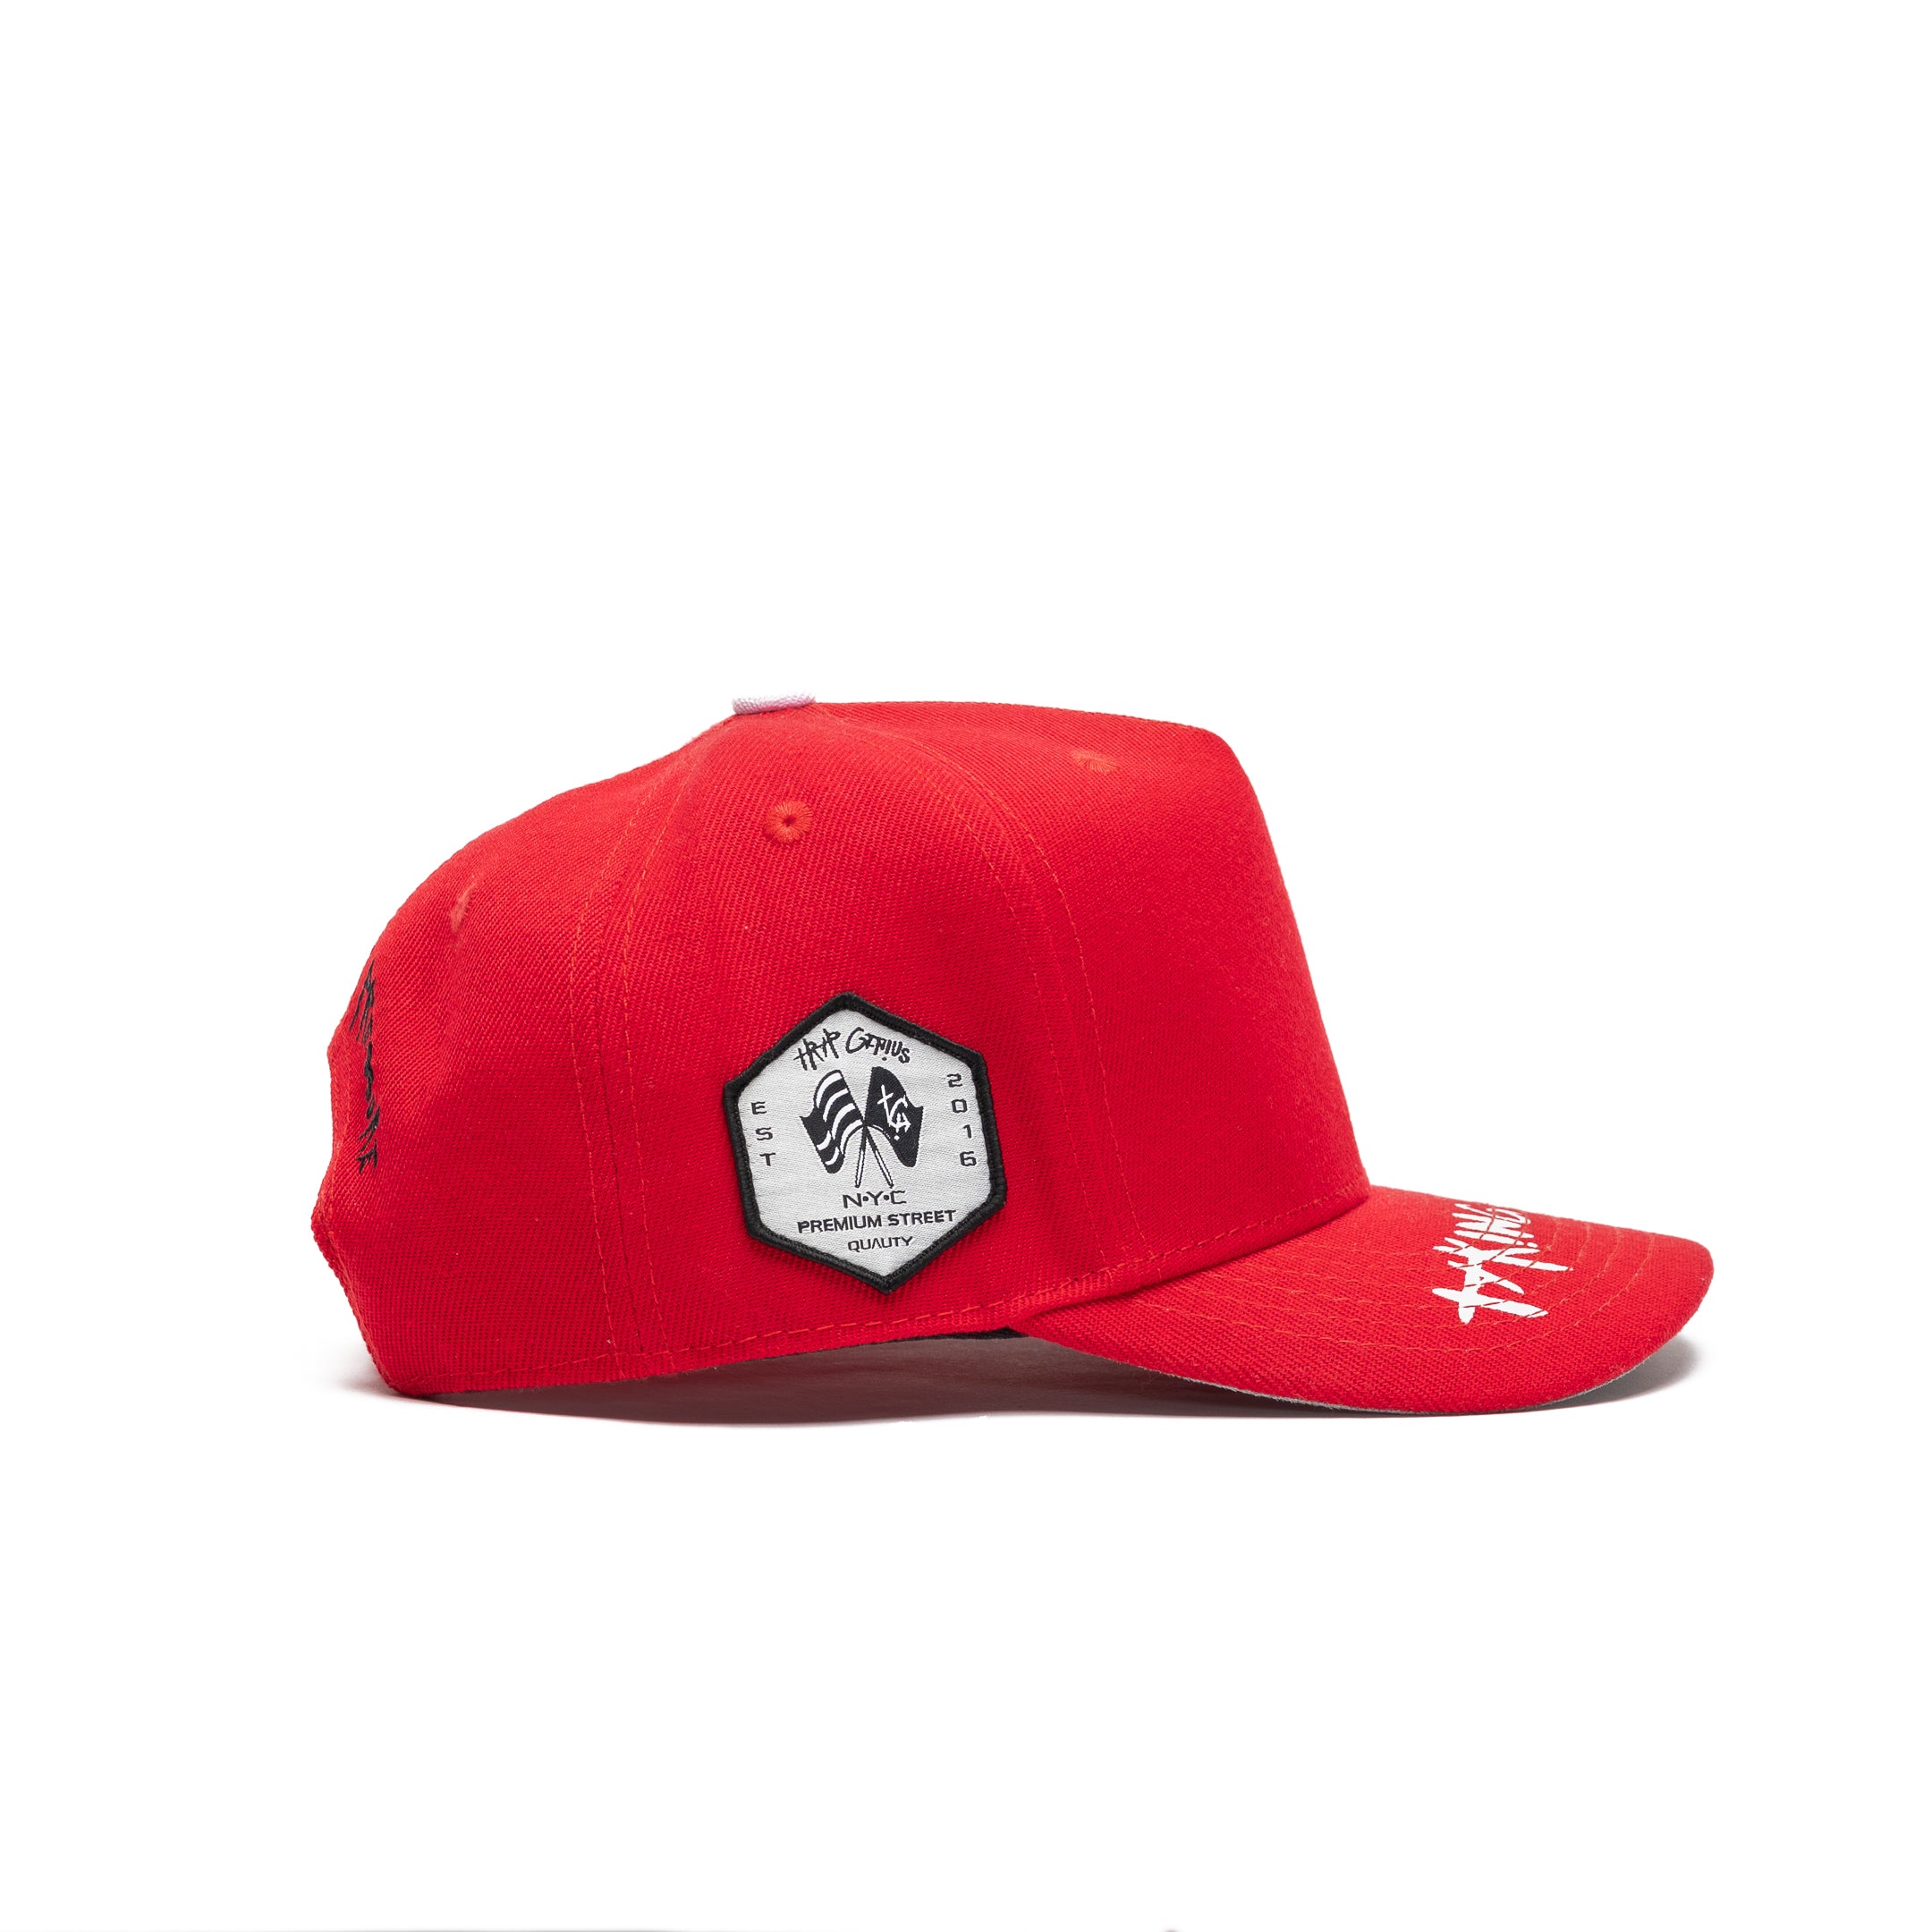 Trap Genius NYC Taking Risk Red Snapback Hat